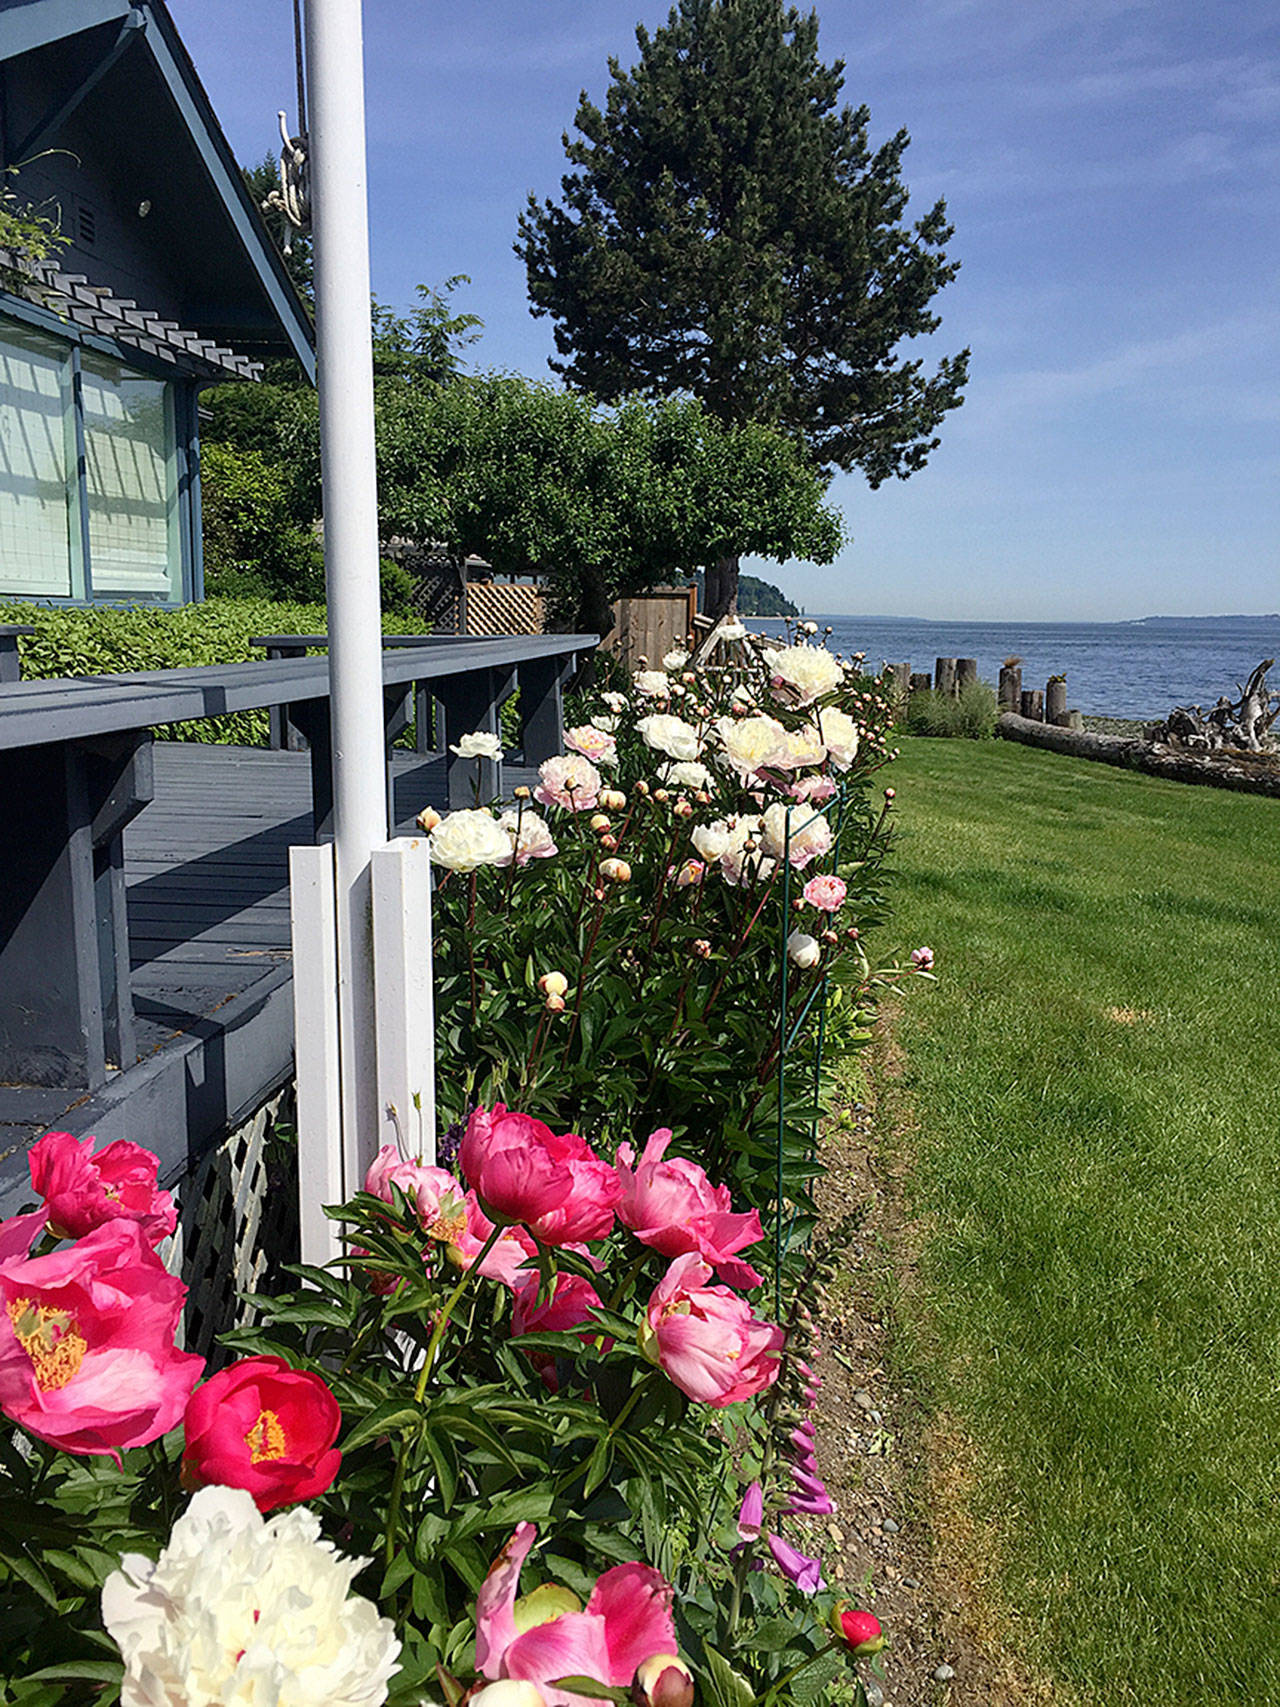 The Olson garden includes a peony border that originated from tubers brought from a family home in Minnesota. (Courtesy Photo)